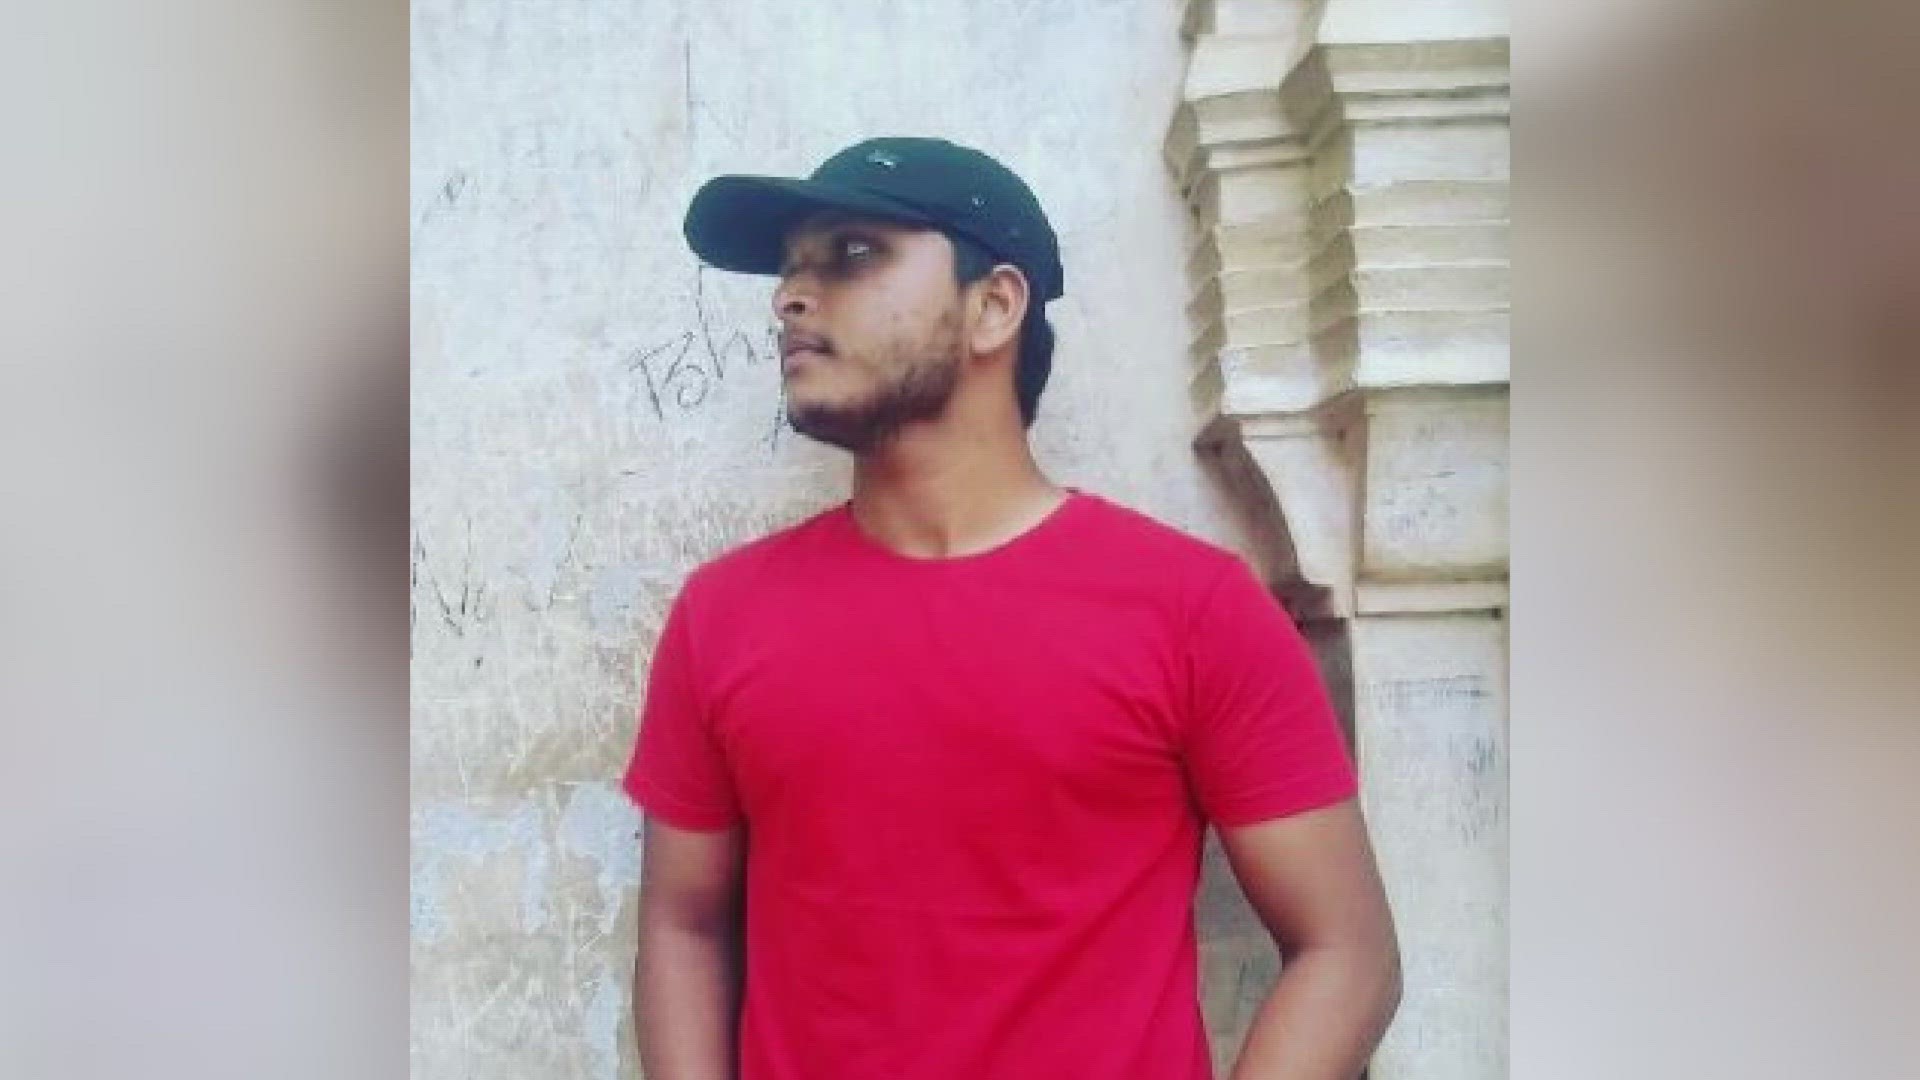 The body has been identified as 25-year-old Abdul Arfath Mohammed.